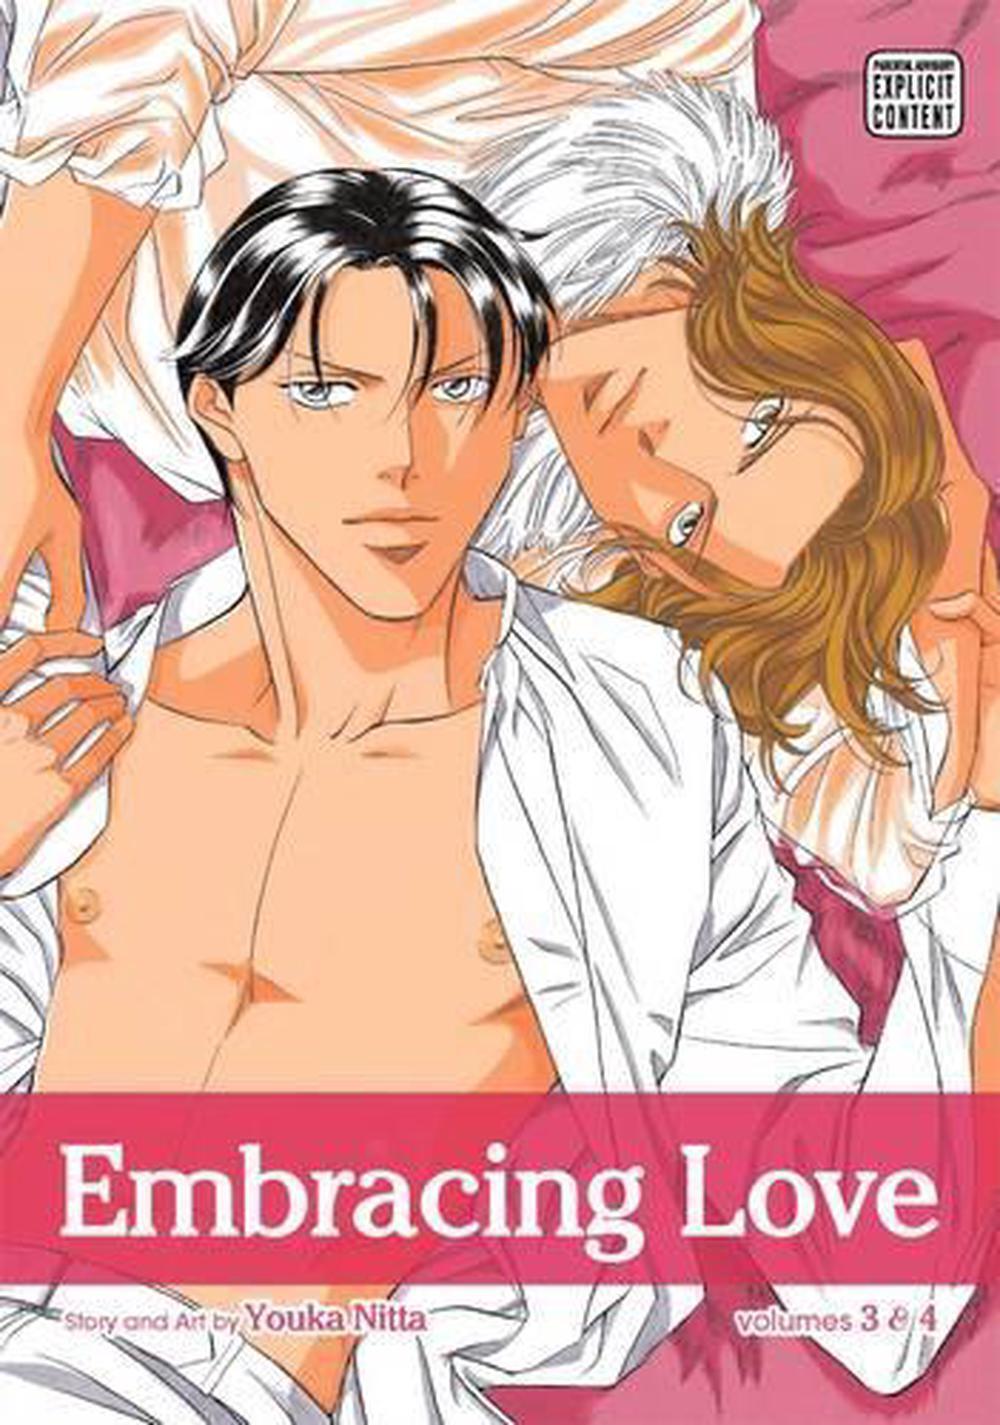 Embracing Love, Vol. 2: 2-in-1 Edition by Youka Nitta (English) Paperback Book